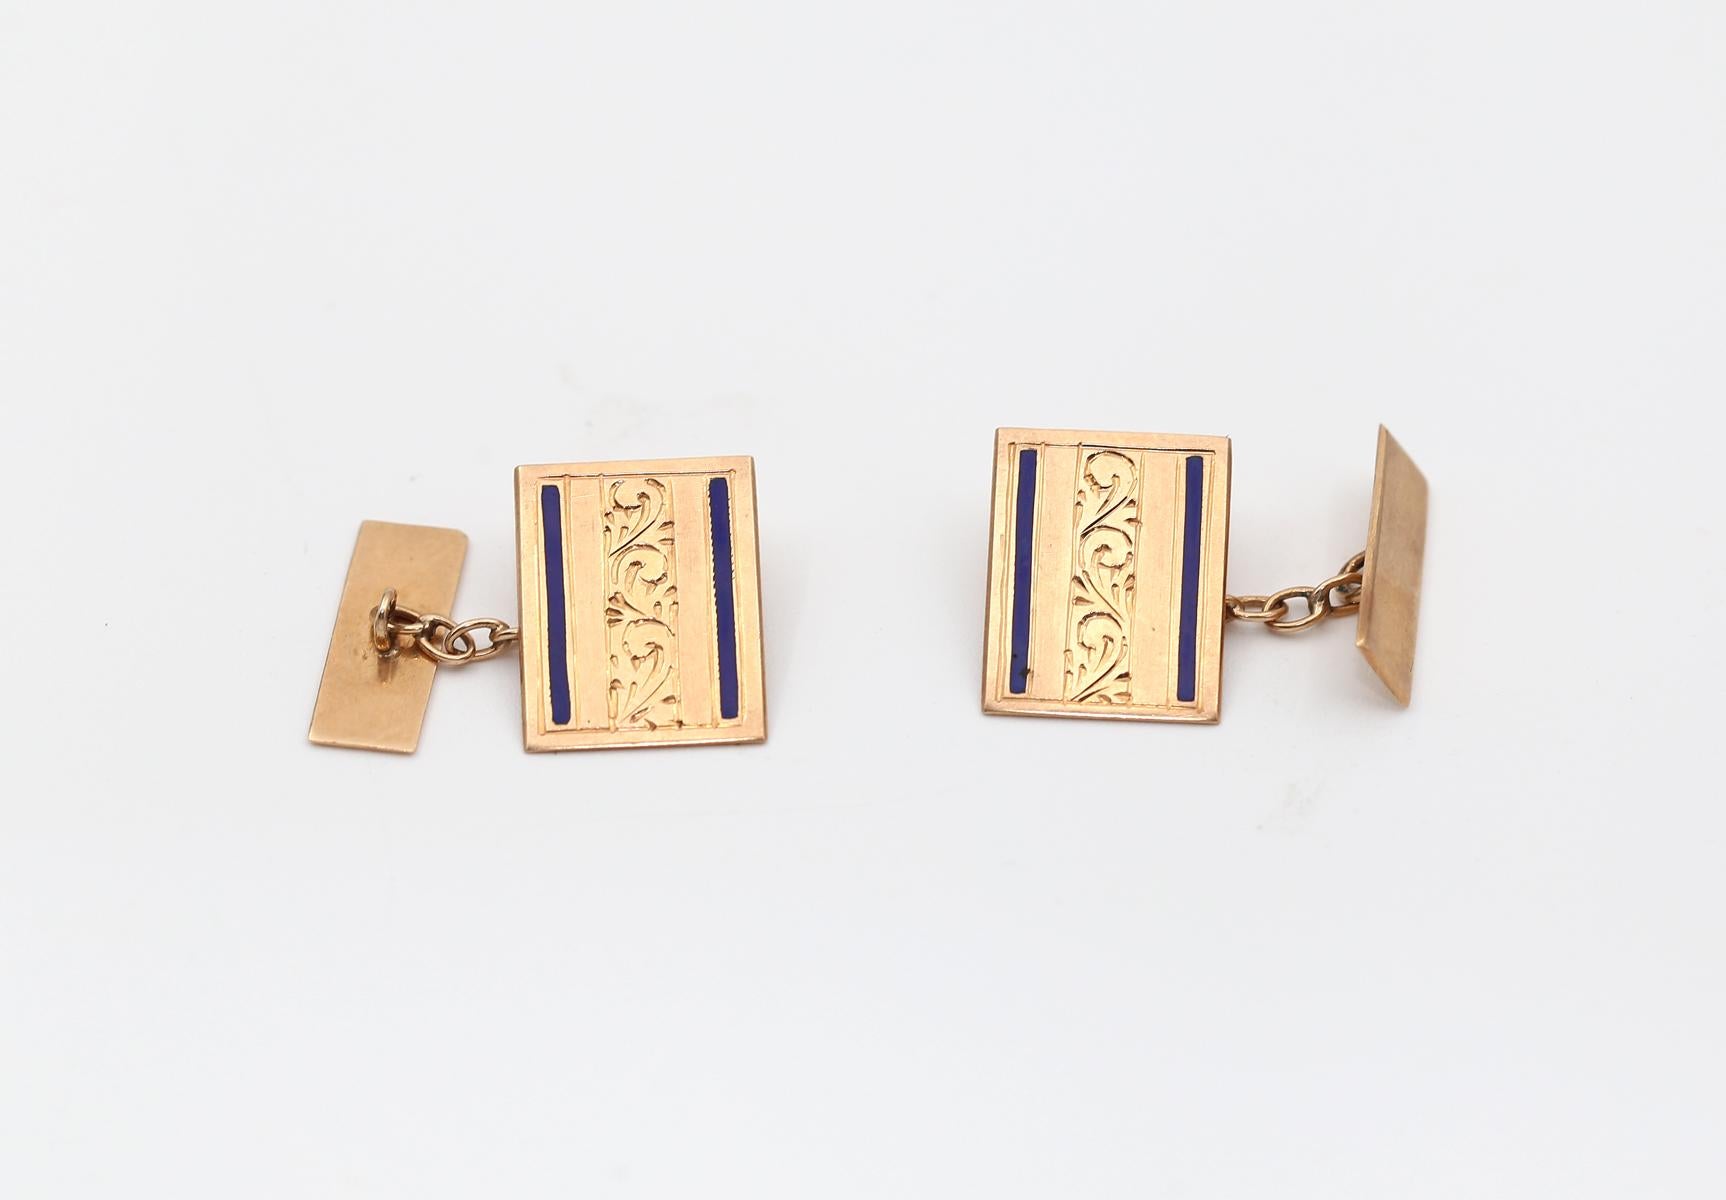 A fine pair of 14k Rose Gold and Enamel Cufflinks.
The deep blue Enamel lines on each side underline the engraved floral motive. 
Delicate and stylish item. Marked.

Engraving on the back of one cufflink says:  5.3.55.
Whoever happens to have a